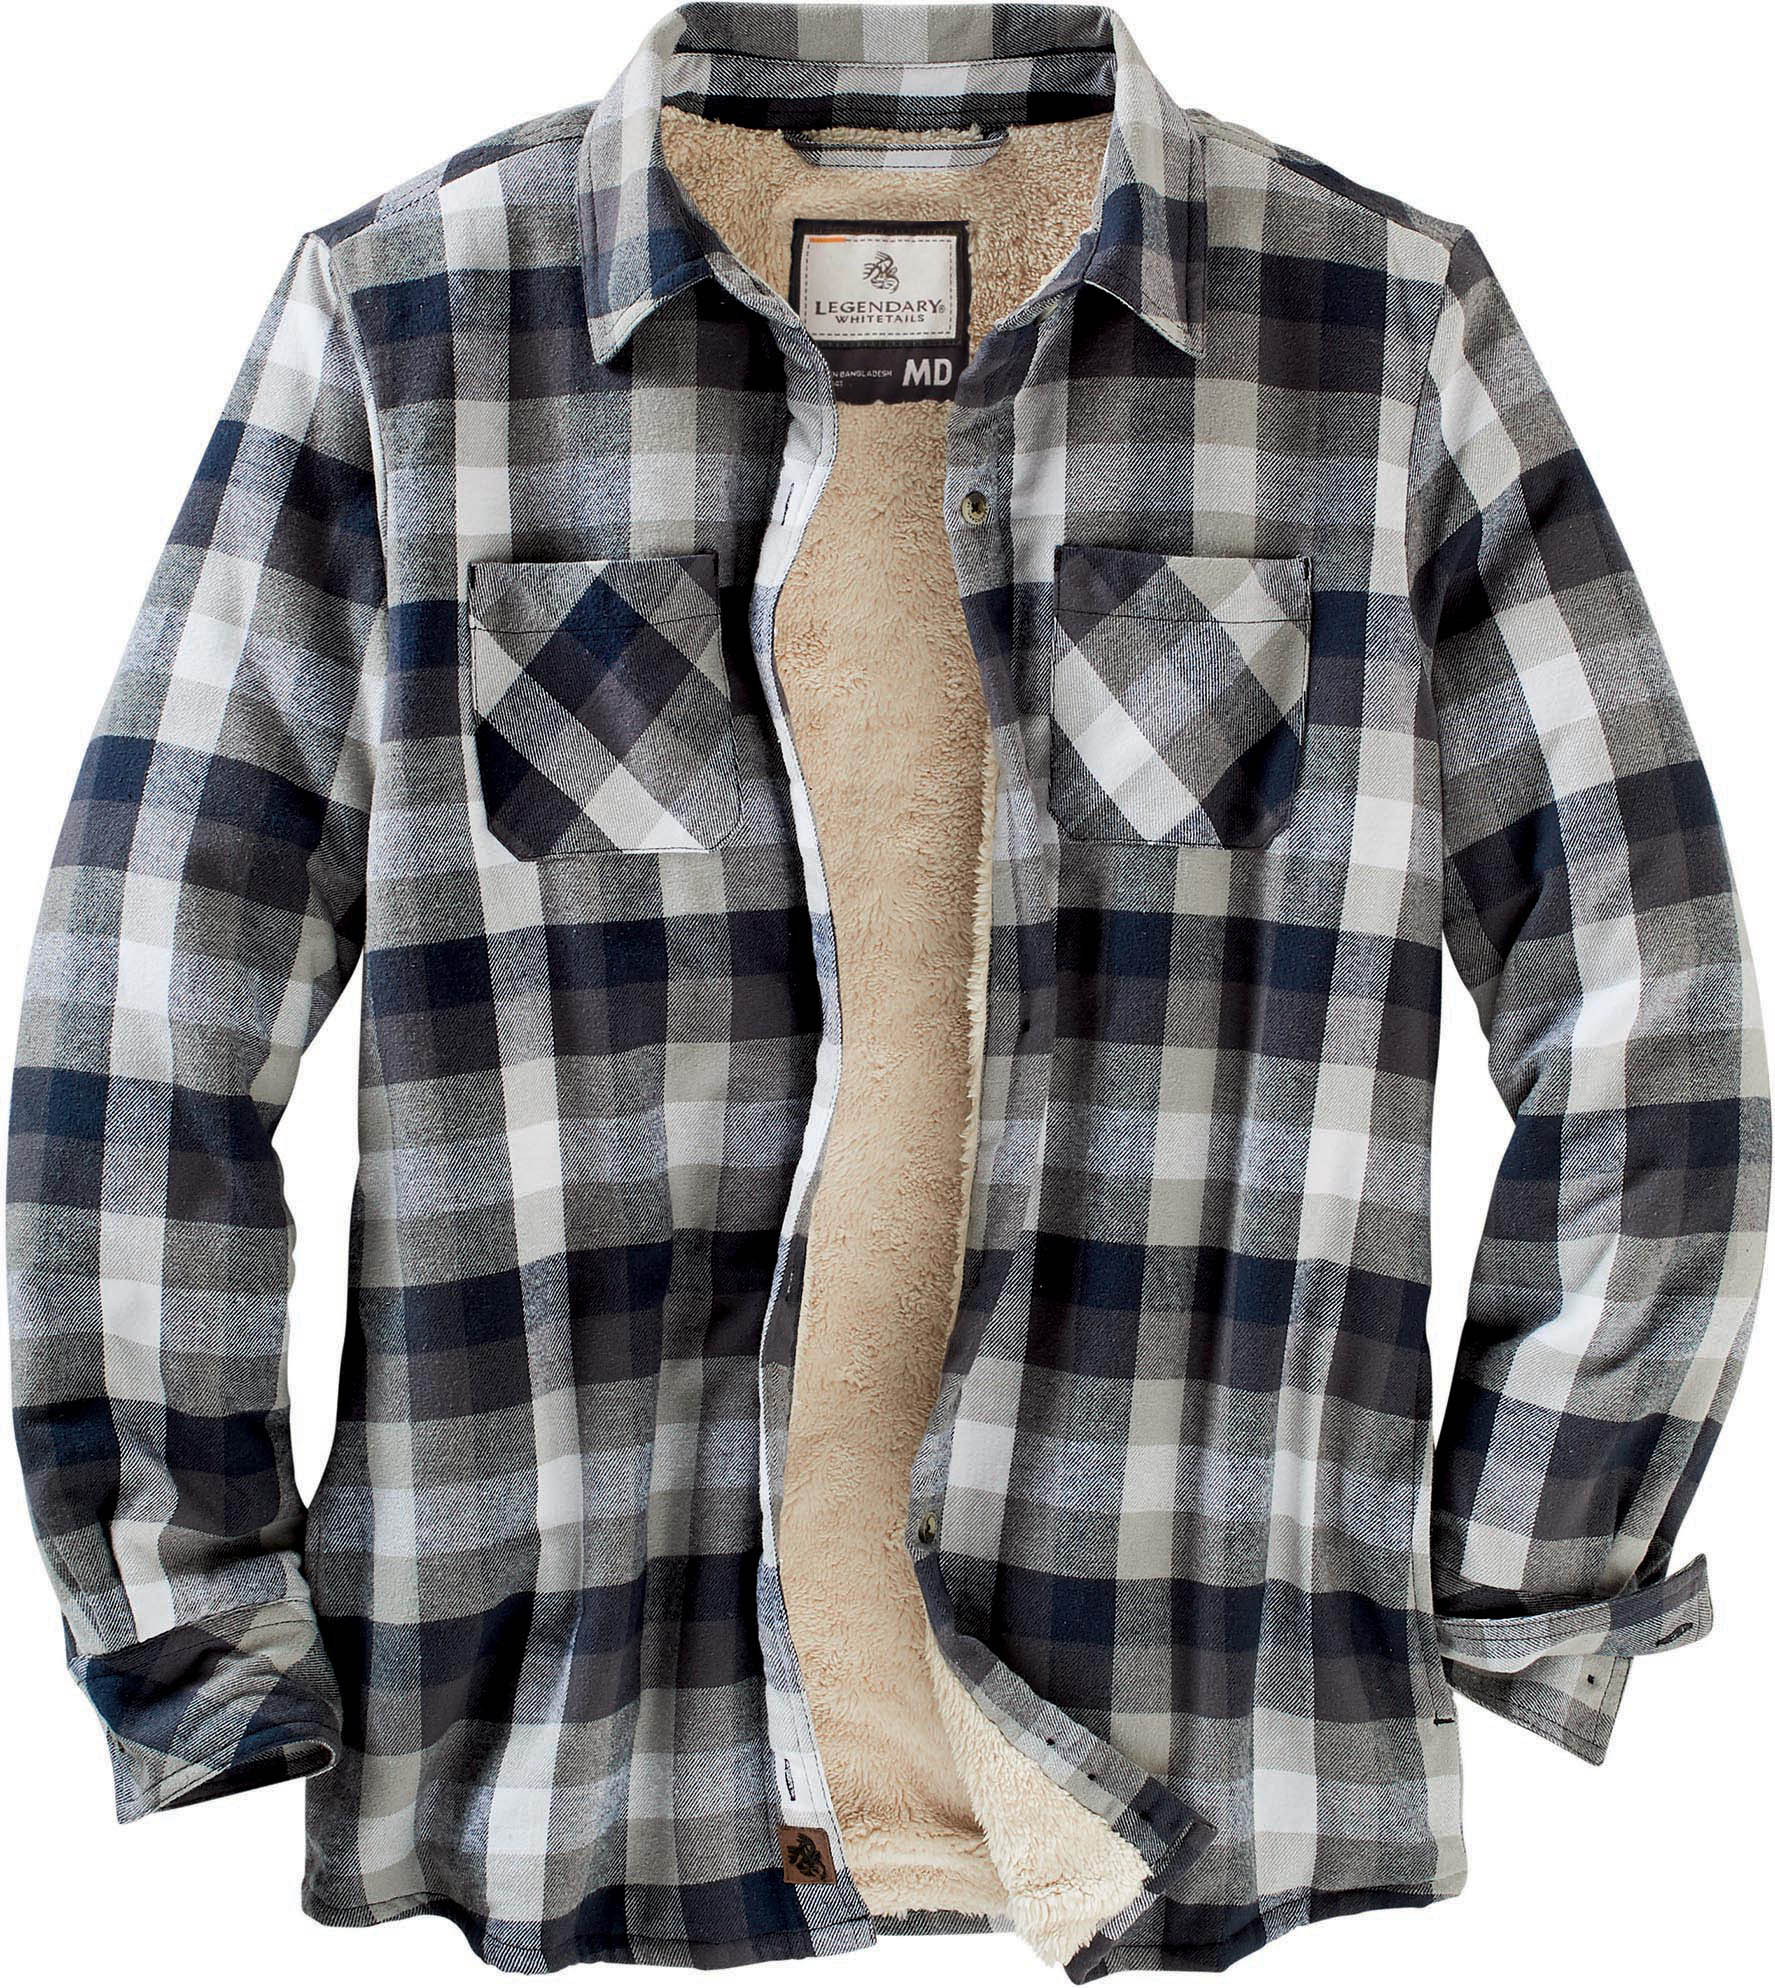 Ladies Open Country Shirt Jacket 